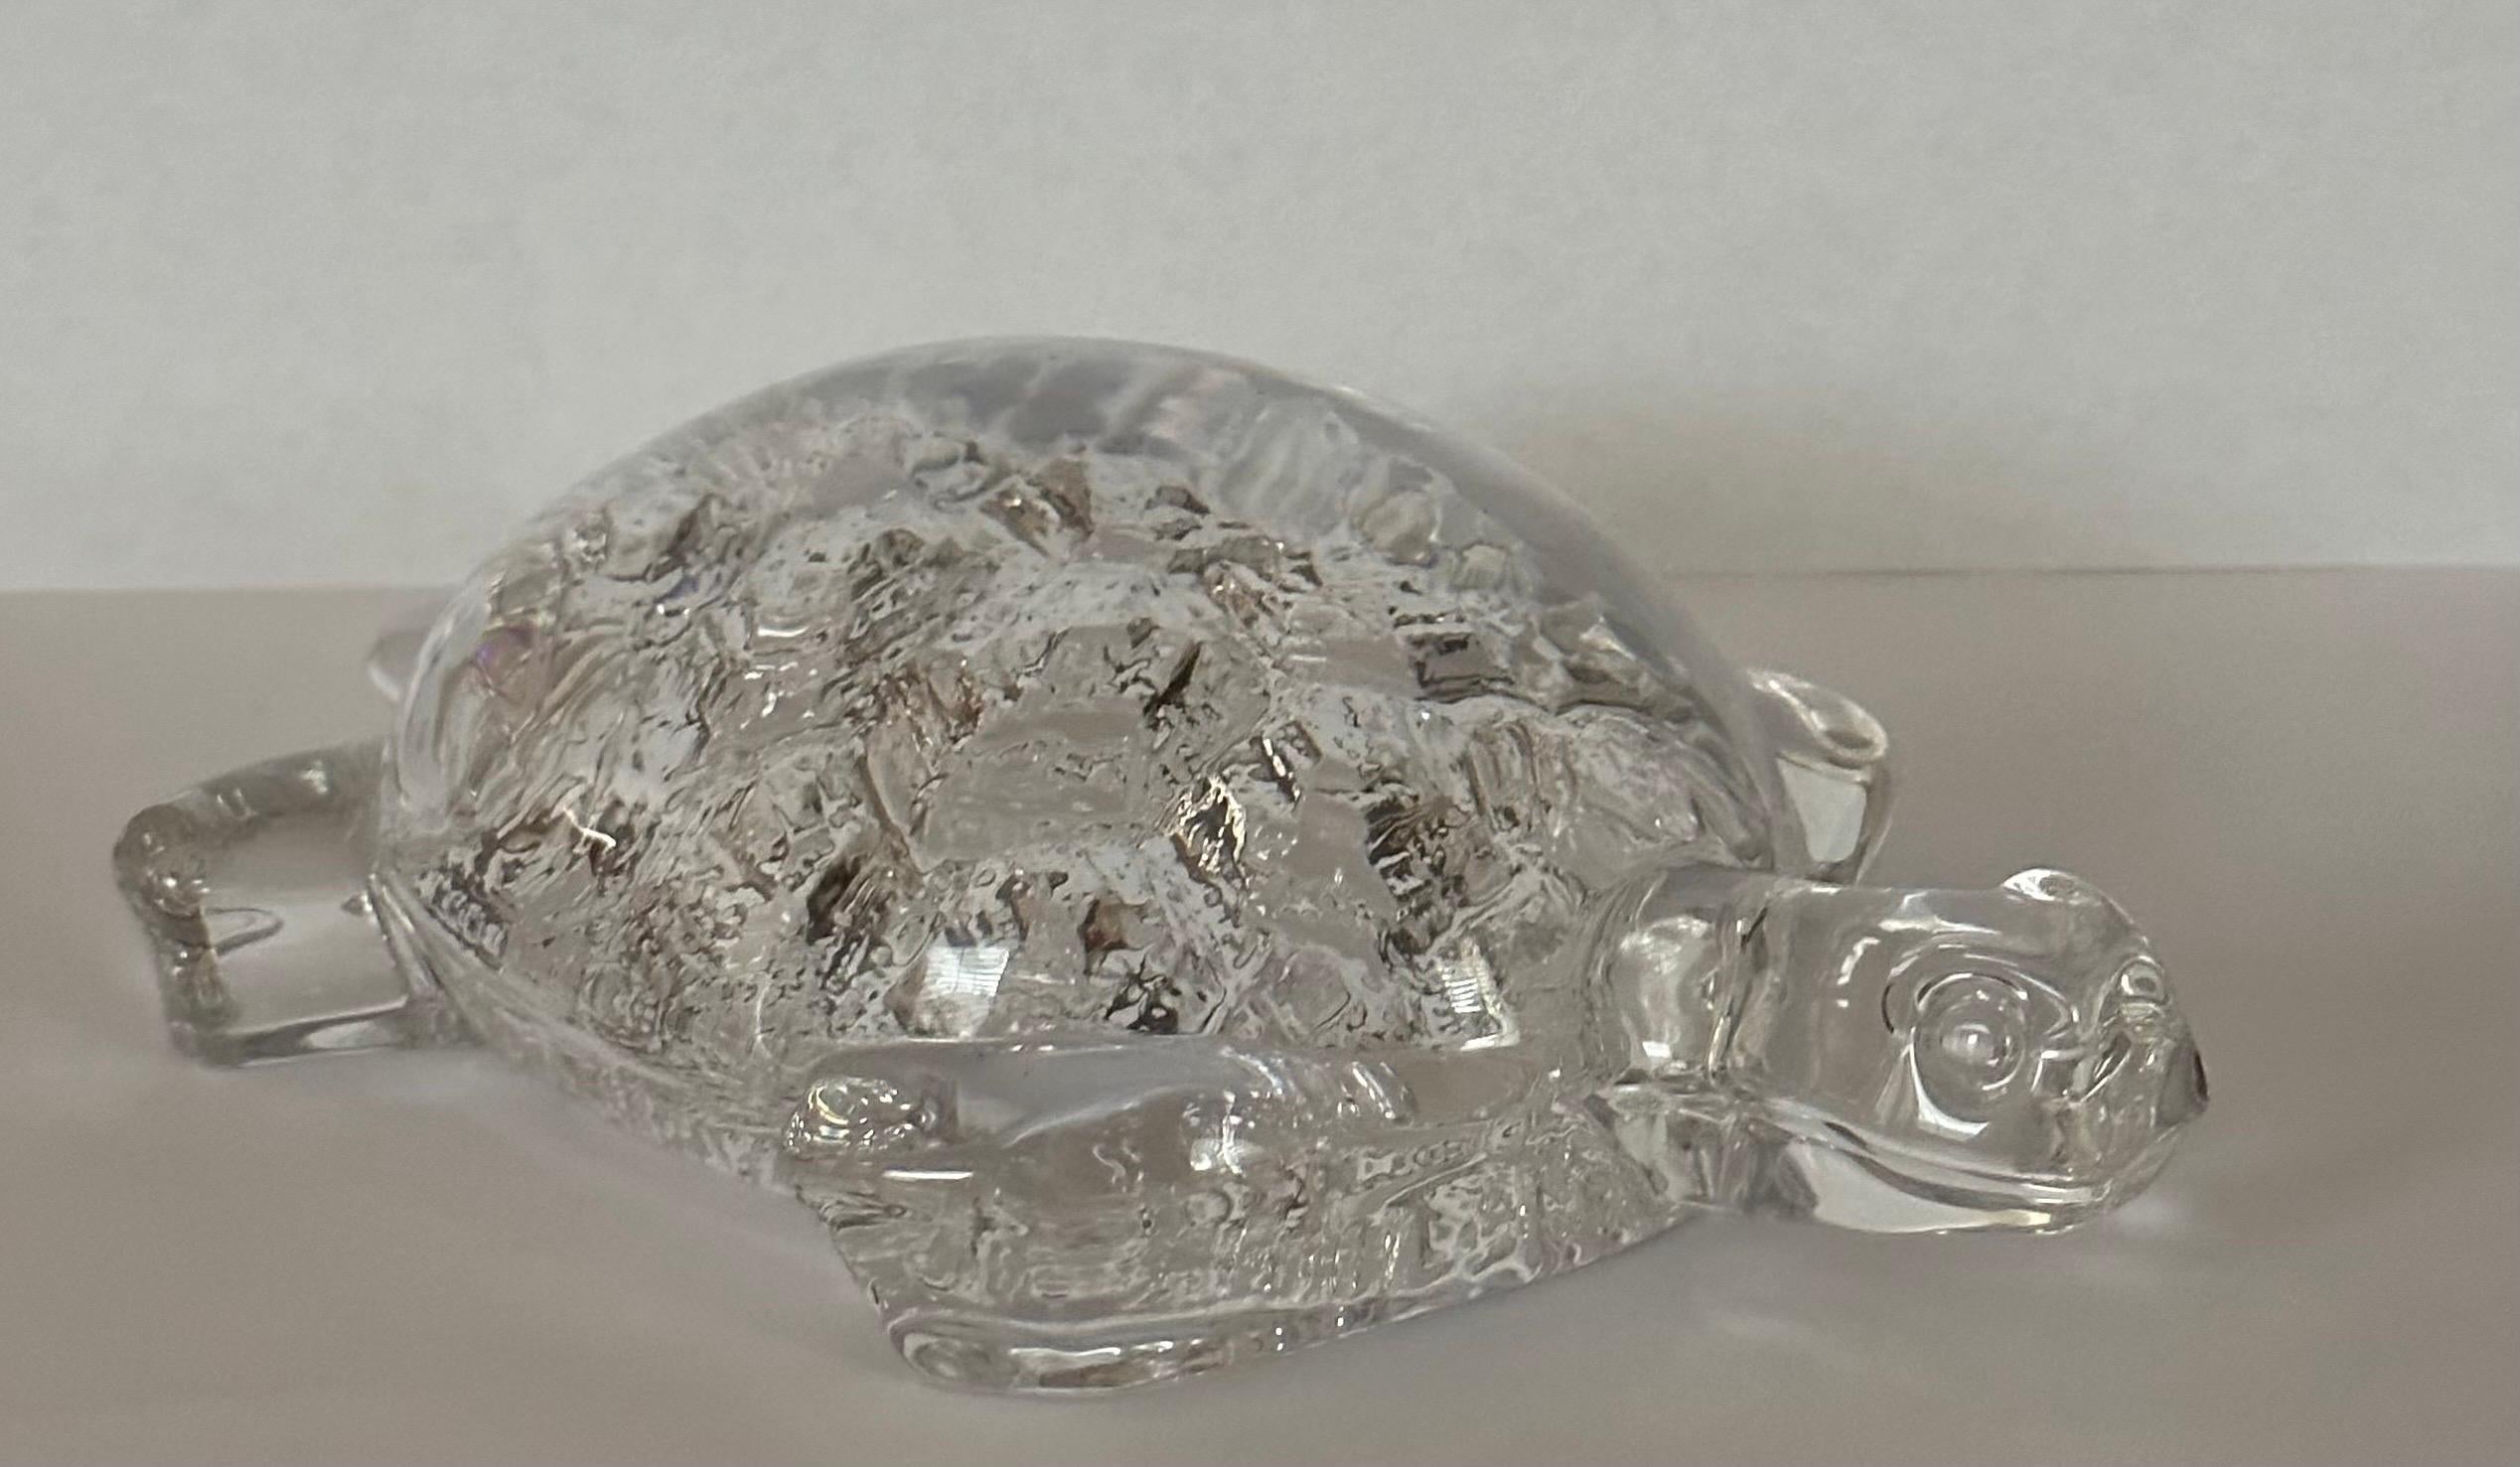 20th Century Stylized Crystal Turtle Sculpture / Paperweight by Daum France